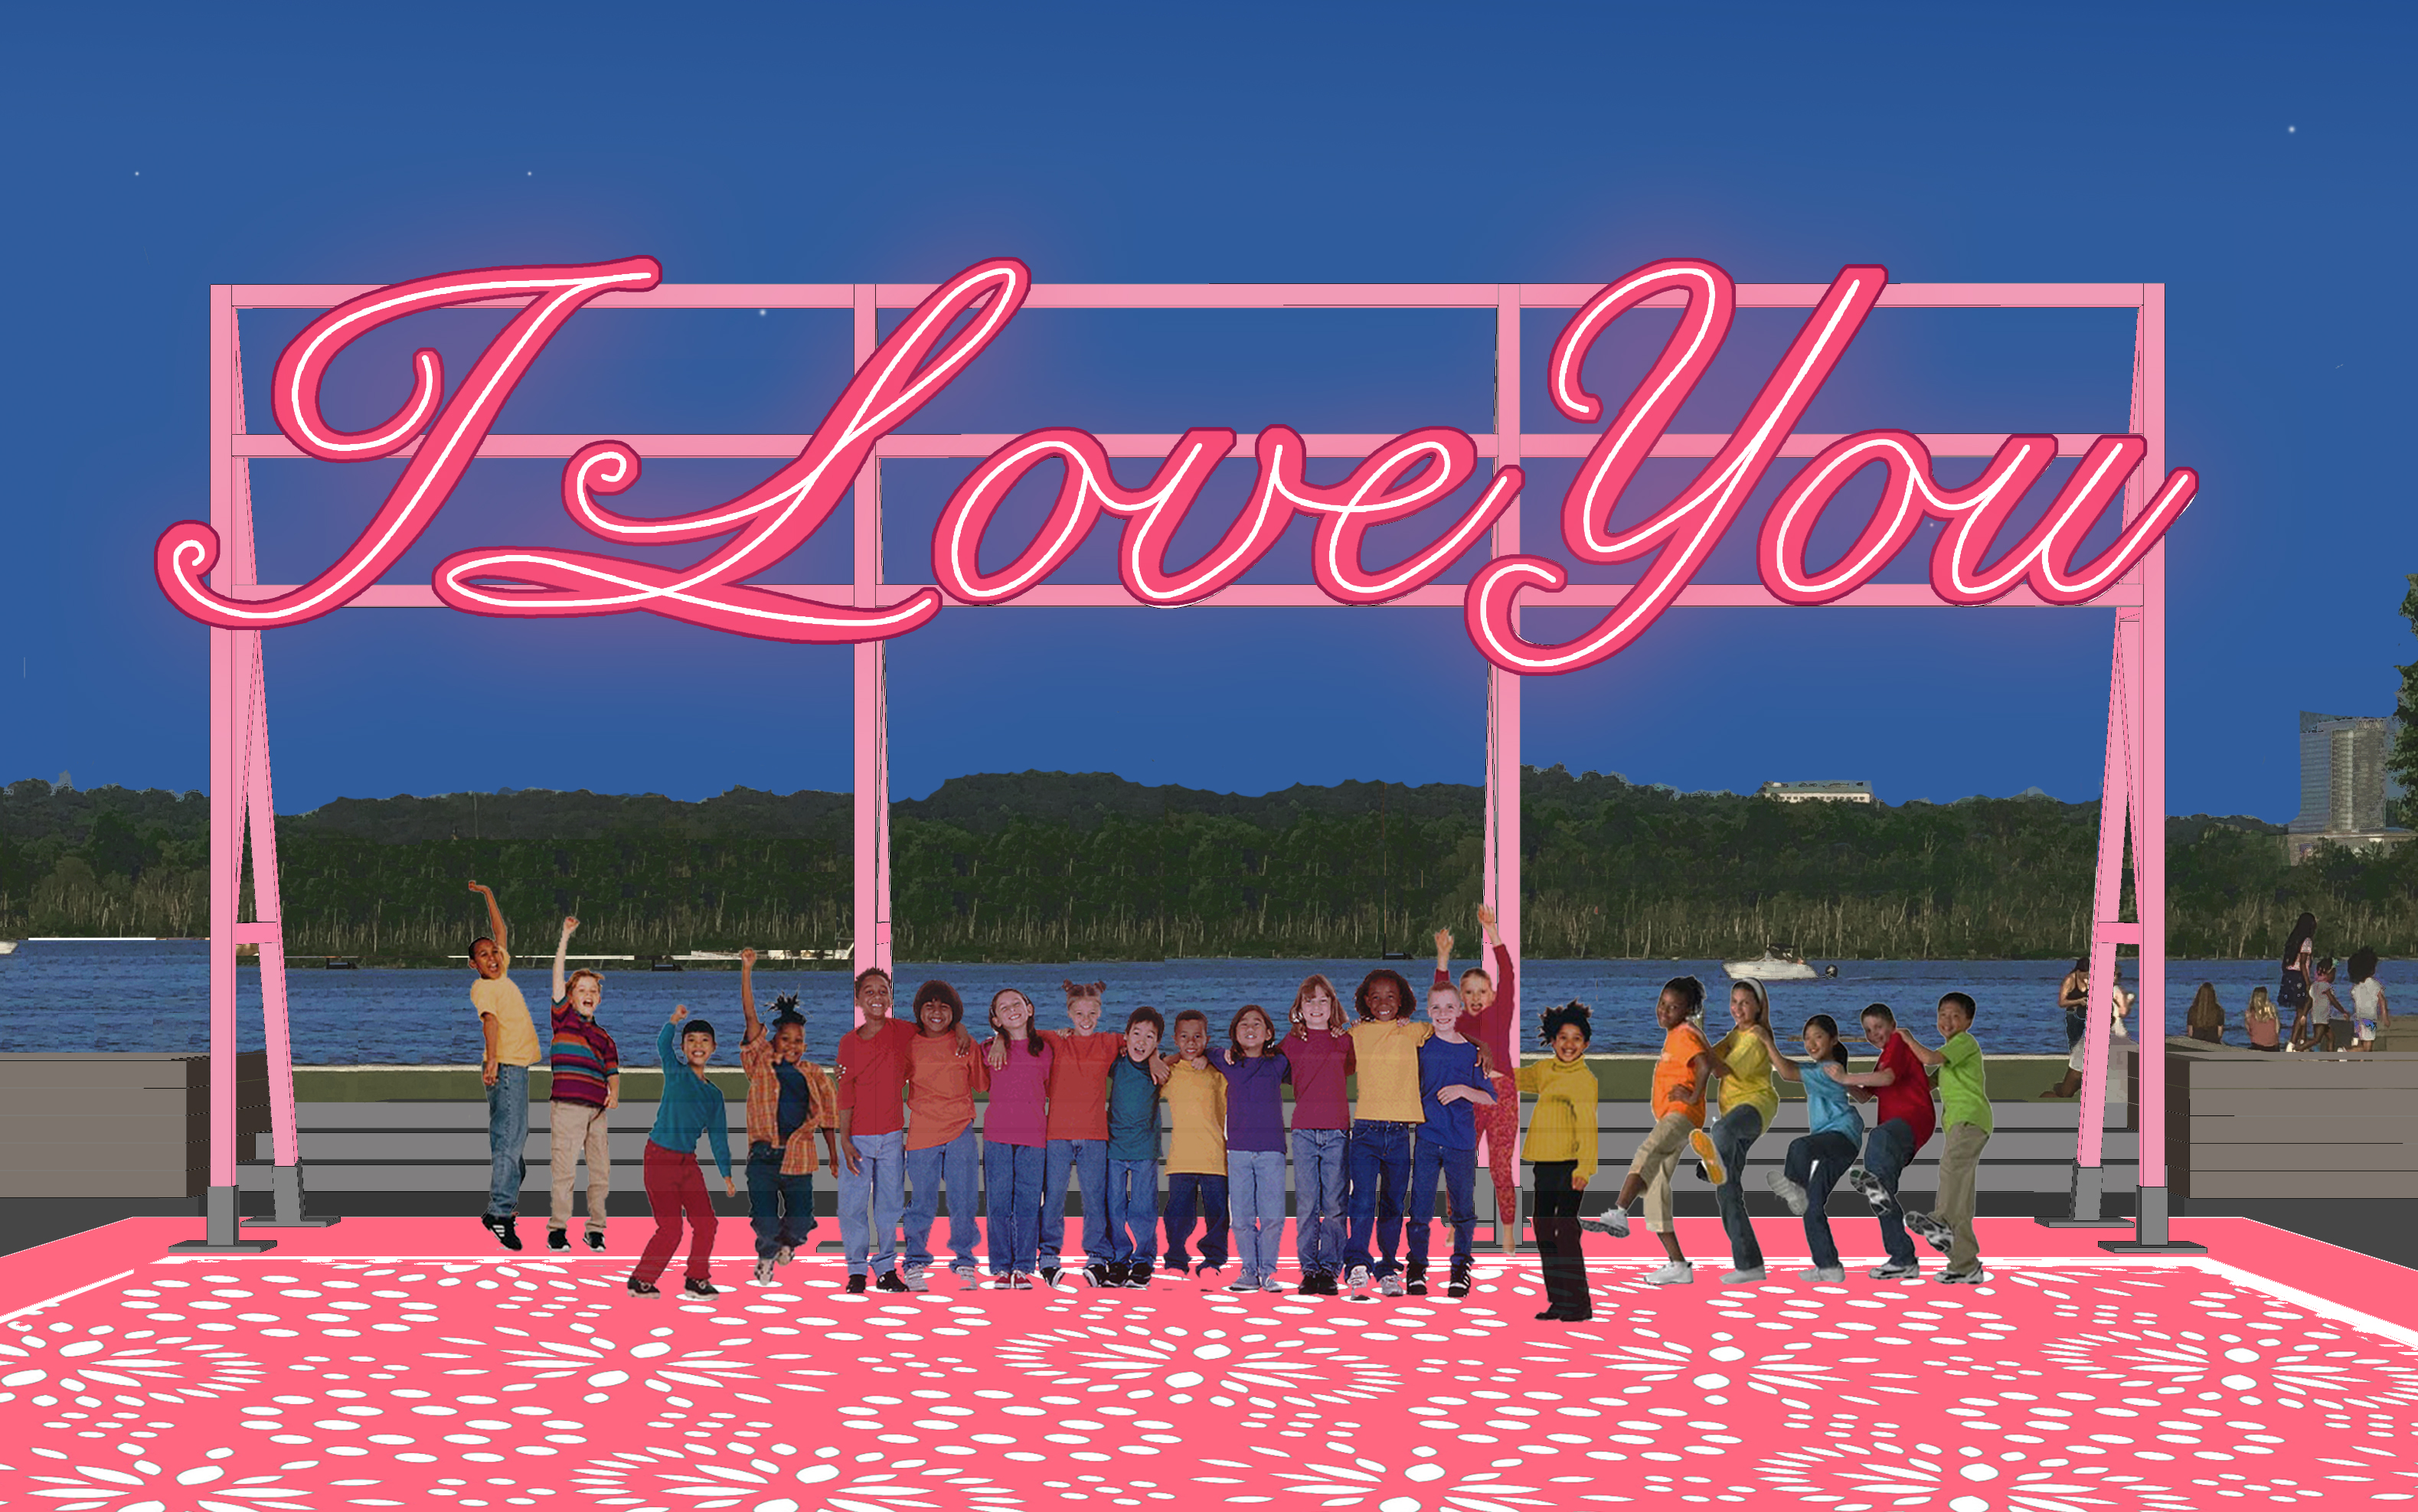 An artists' rendering with I love you written in neon script with a crowd of people below and the Potomac River in the background